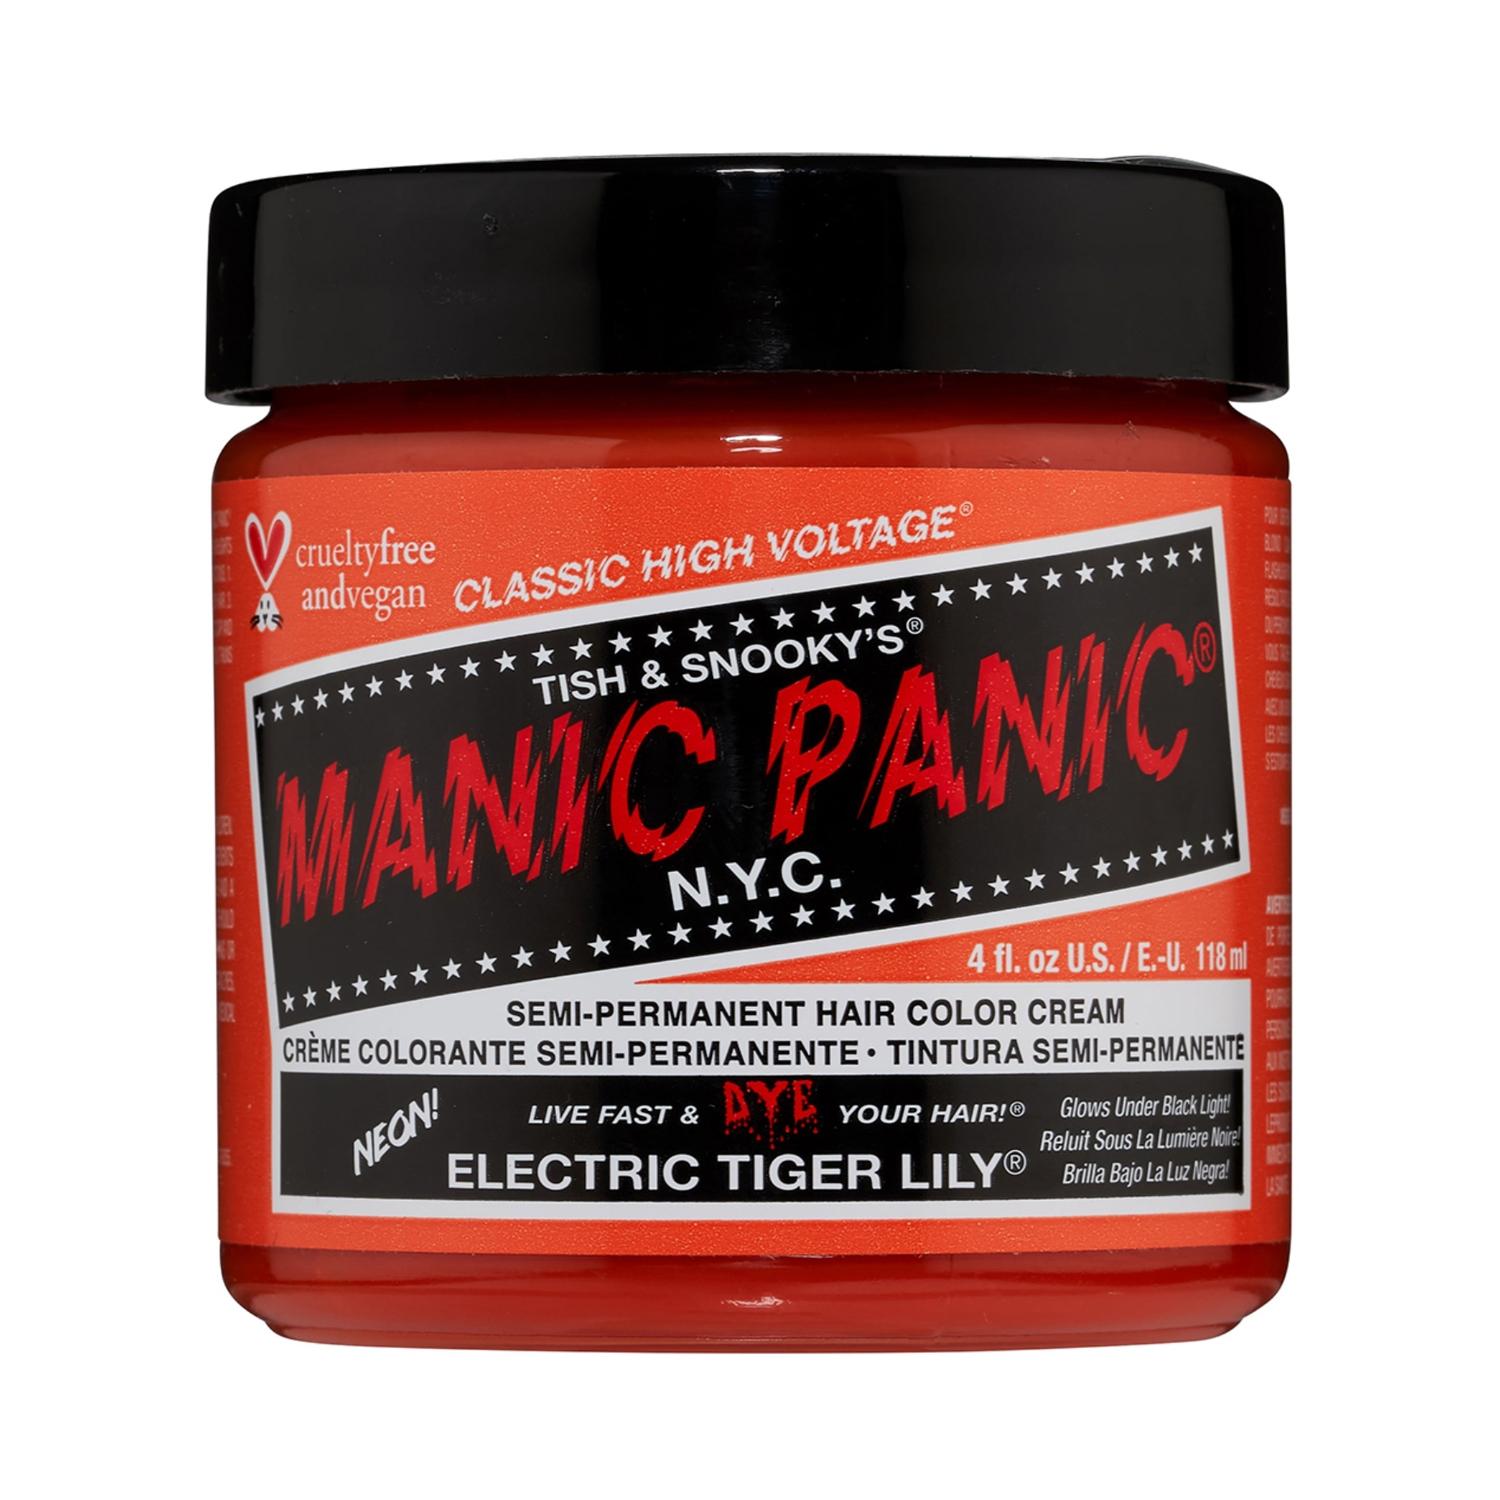 manic panic classic high voltage semi permanent hair color cream - electric tiger lily (118ml)